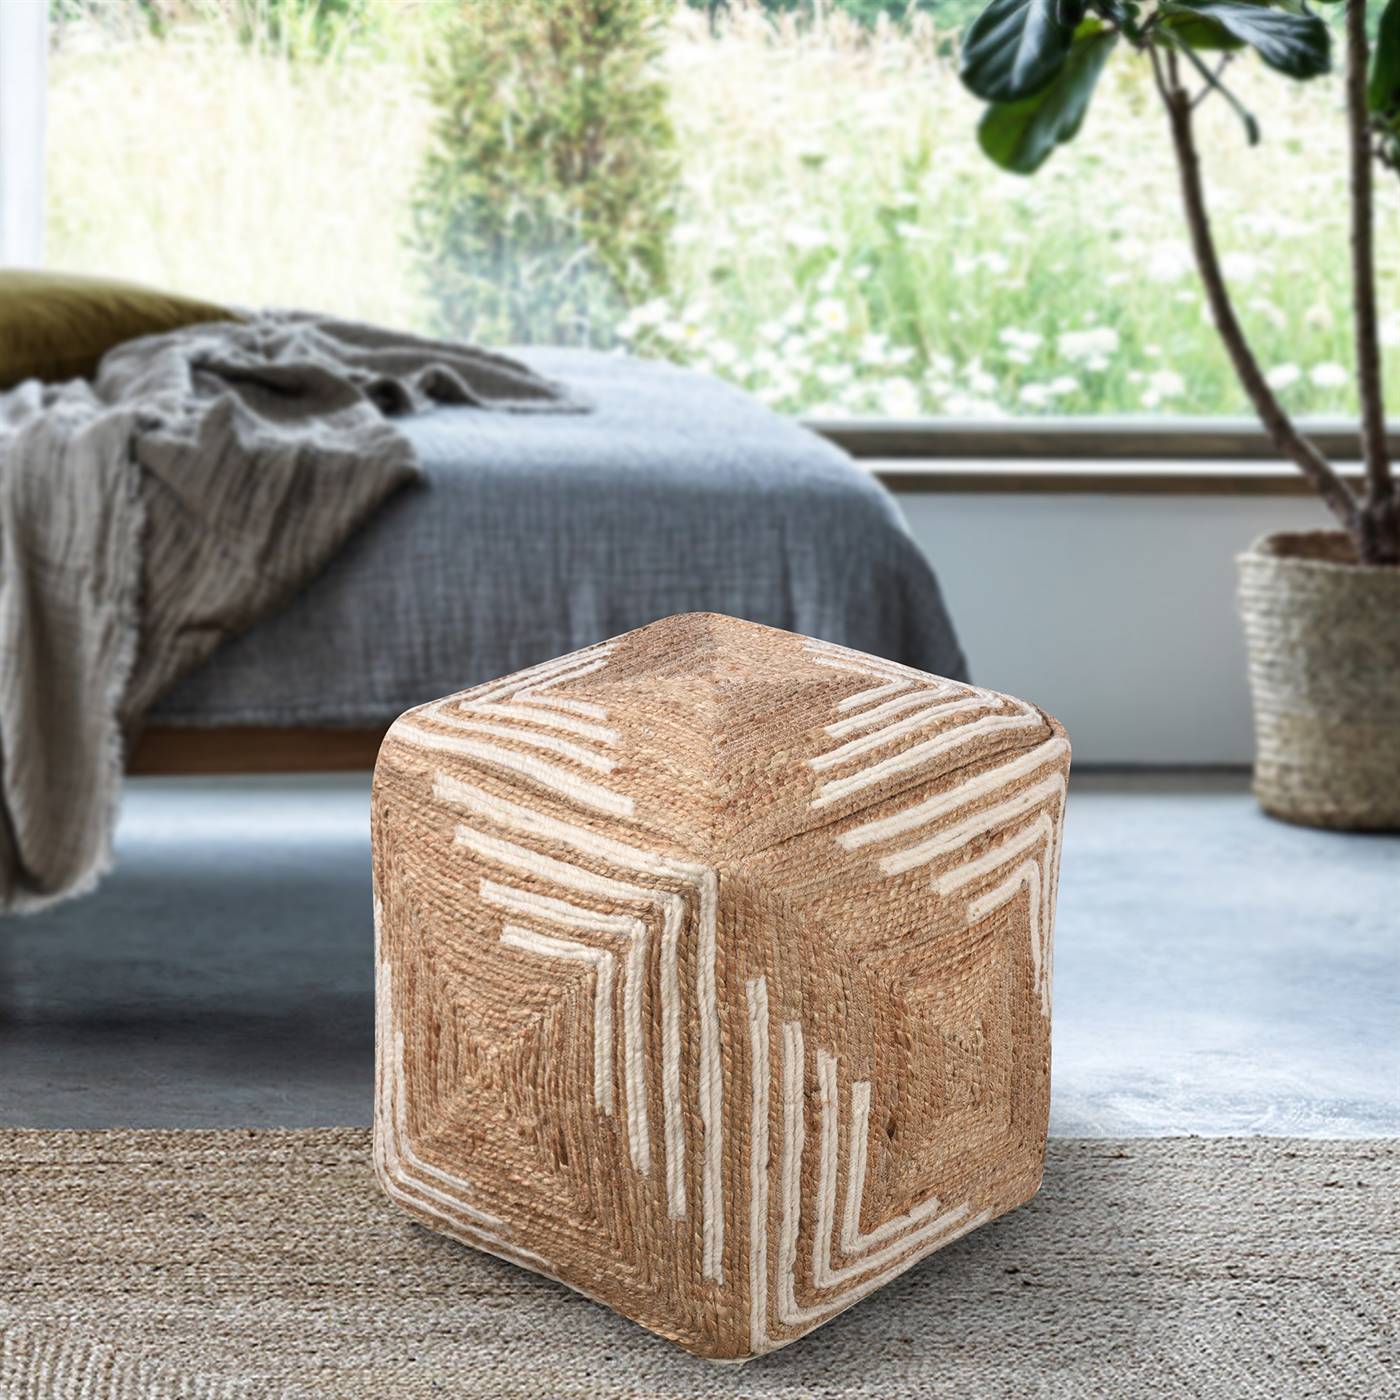 Kylie Pouf, 40x40x40 cm, Natural, Natural White, Jute, Wool, Hand Made, Hm Stitching, Flat Weave